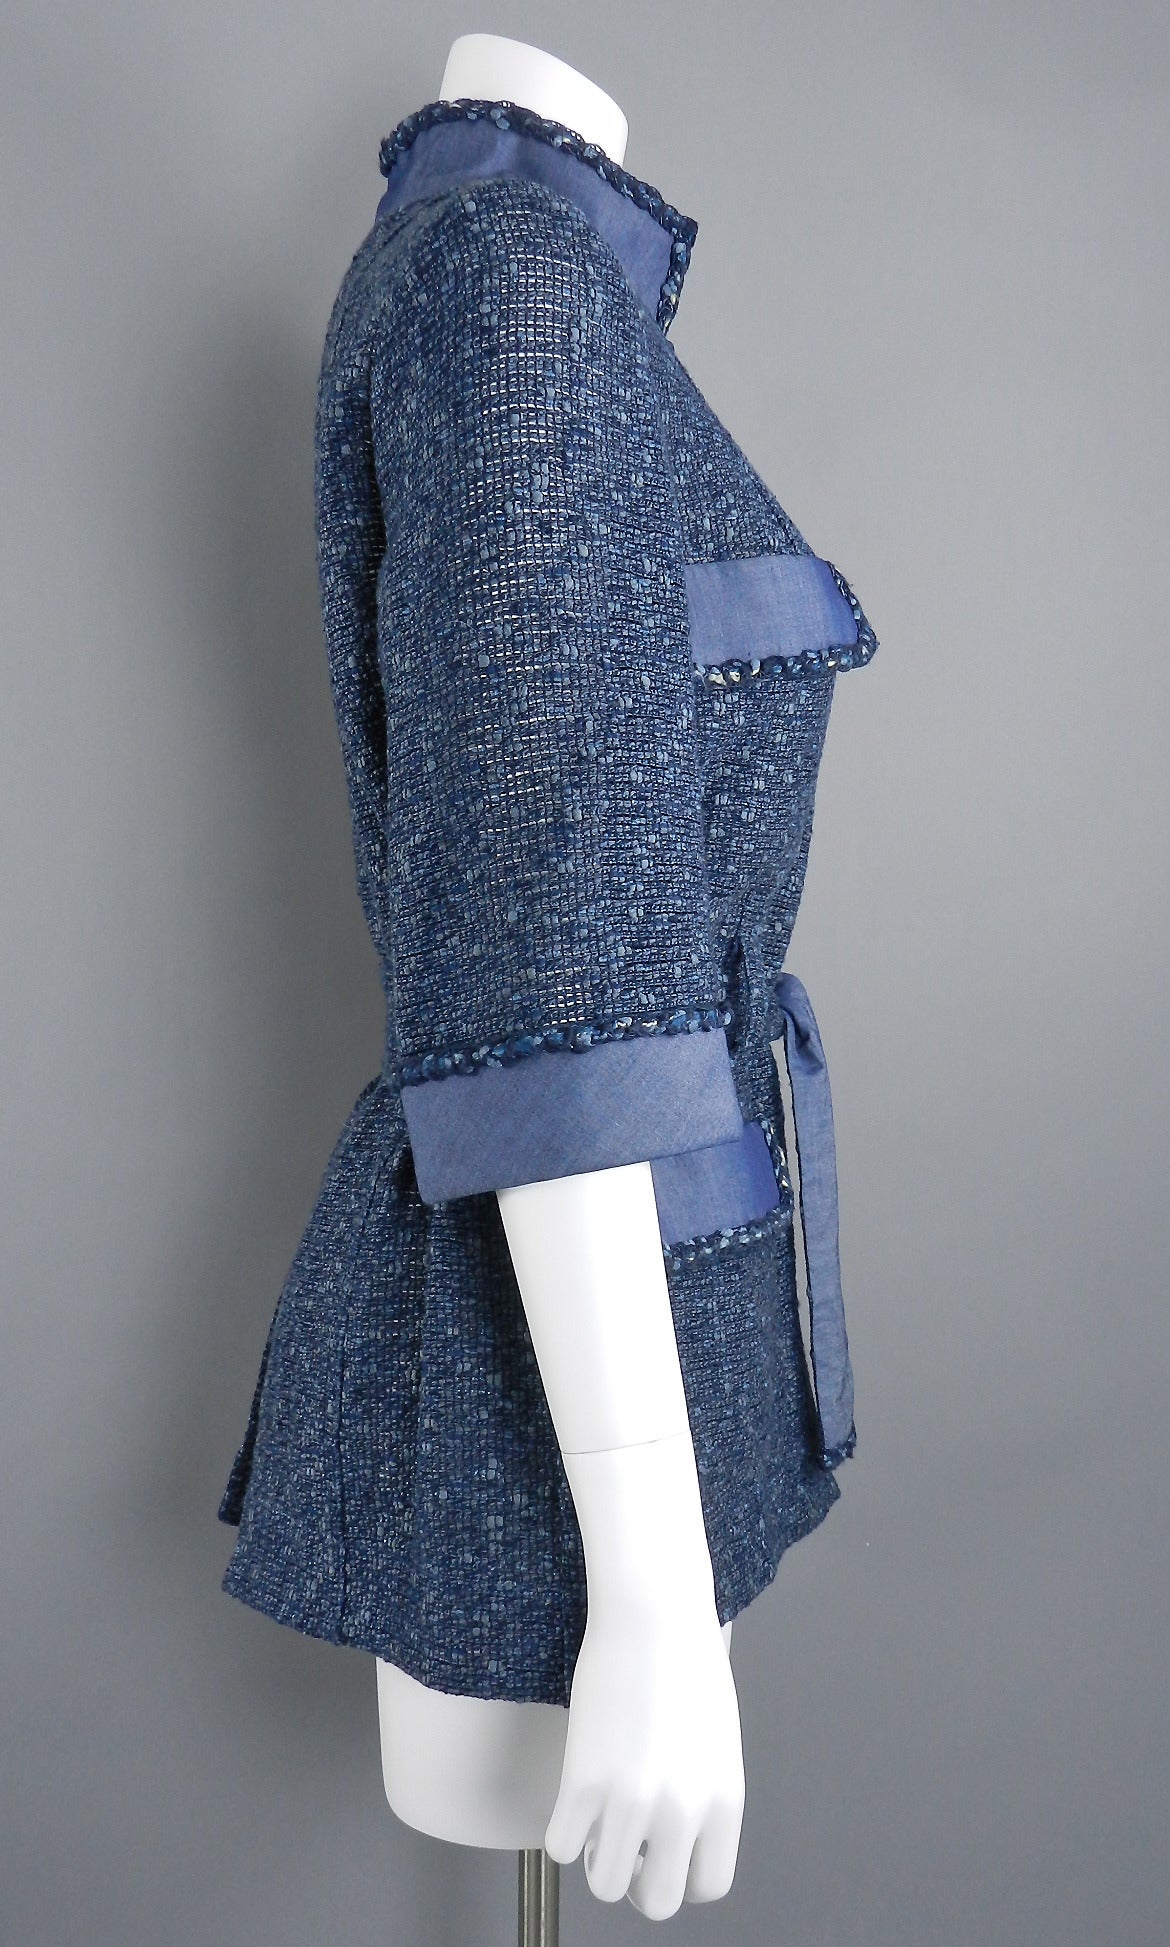 Chanel 2012 Spring denim blue jacket with sash belt. Unlined and unstructured jacket made of 48% cotton, 33 nylon, 14 acrylic, 5 silk. Tagged size FR 38 (USA 6 and can fit an 8). Garment bust is 38